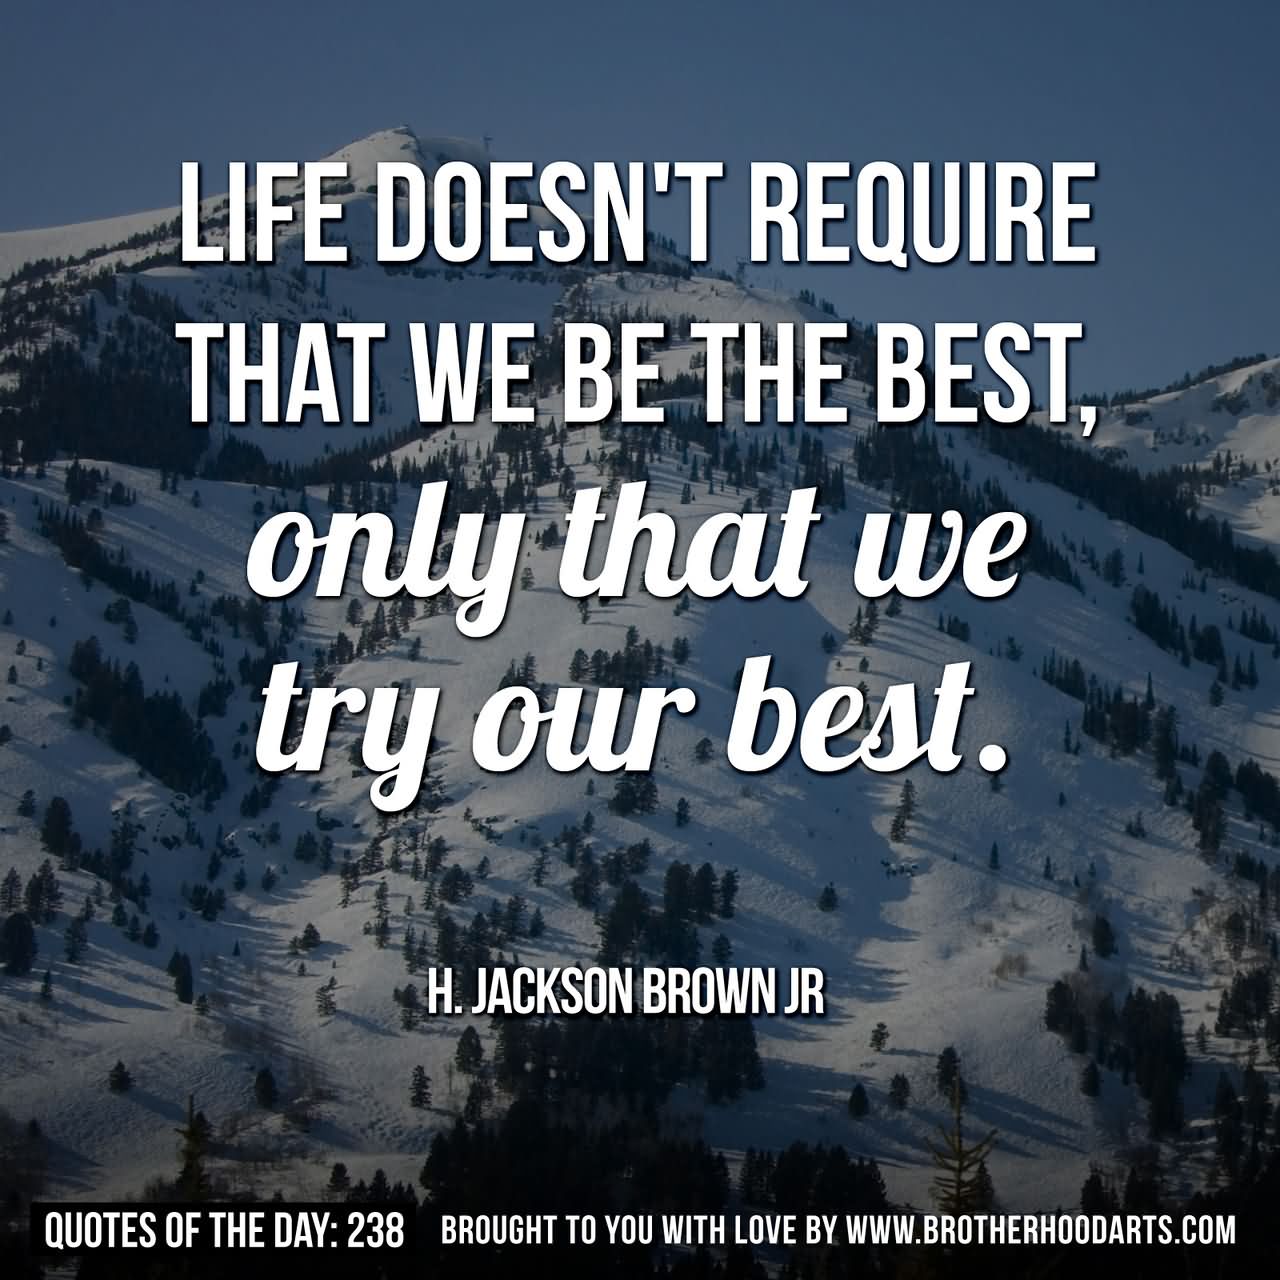 Life doesn't require that we be the best, only that we try our best. - H. Jackson Brown, Jr.